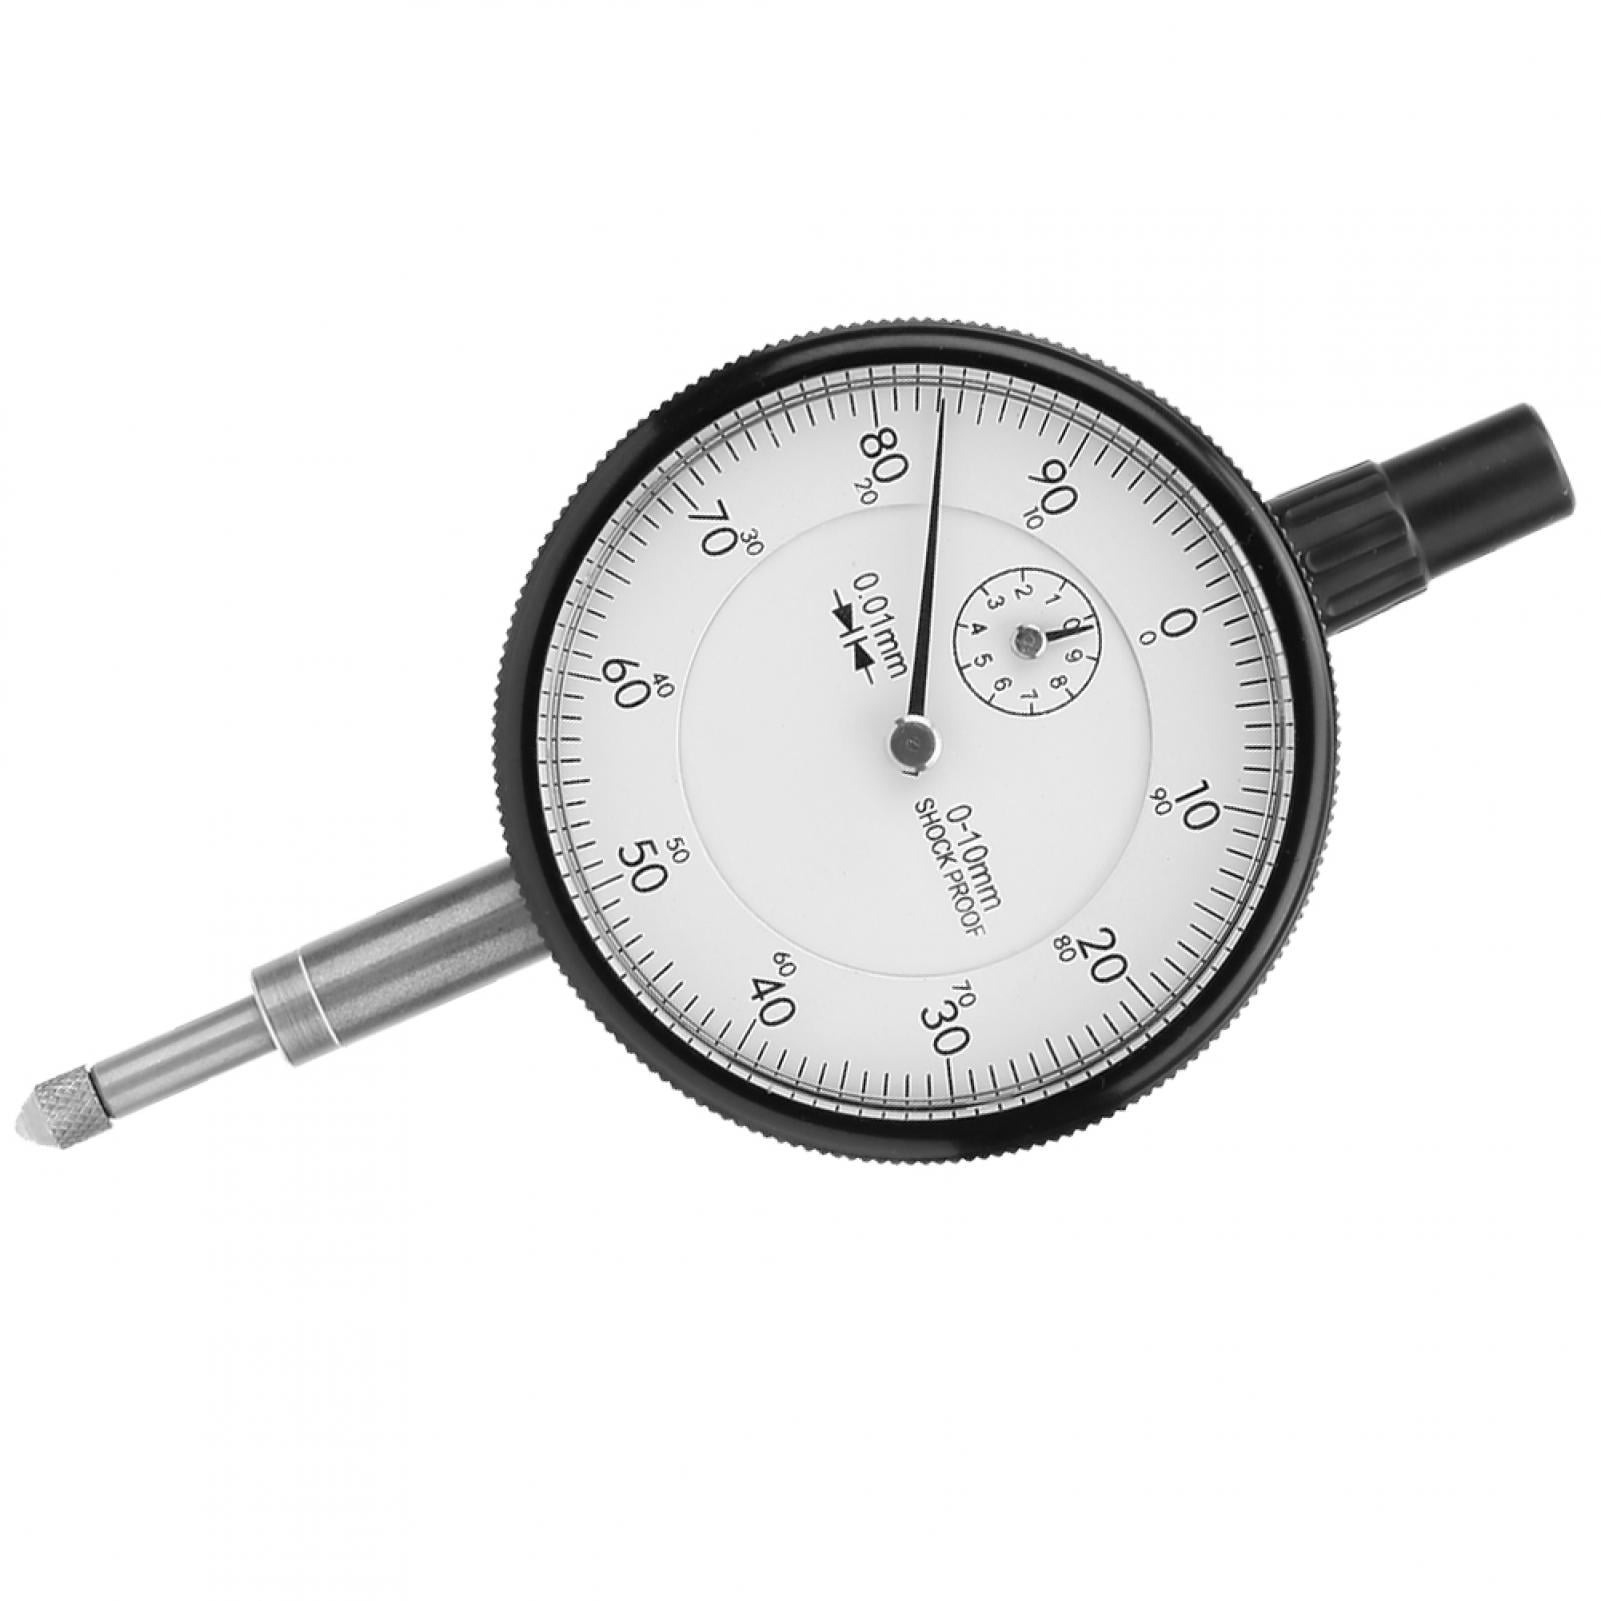 Easy to Carry Practical for Measuring Tool Industrial Hardware Measuring Equipment Industrial Supplies Professional Dial Gauge Measurement Instrument Gauge 